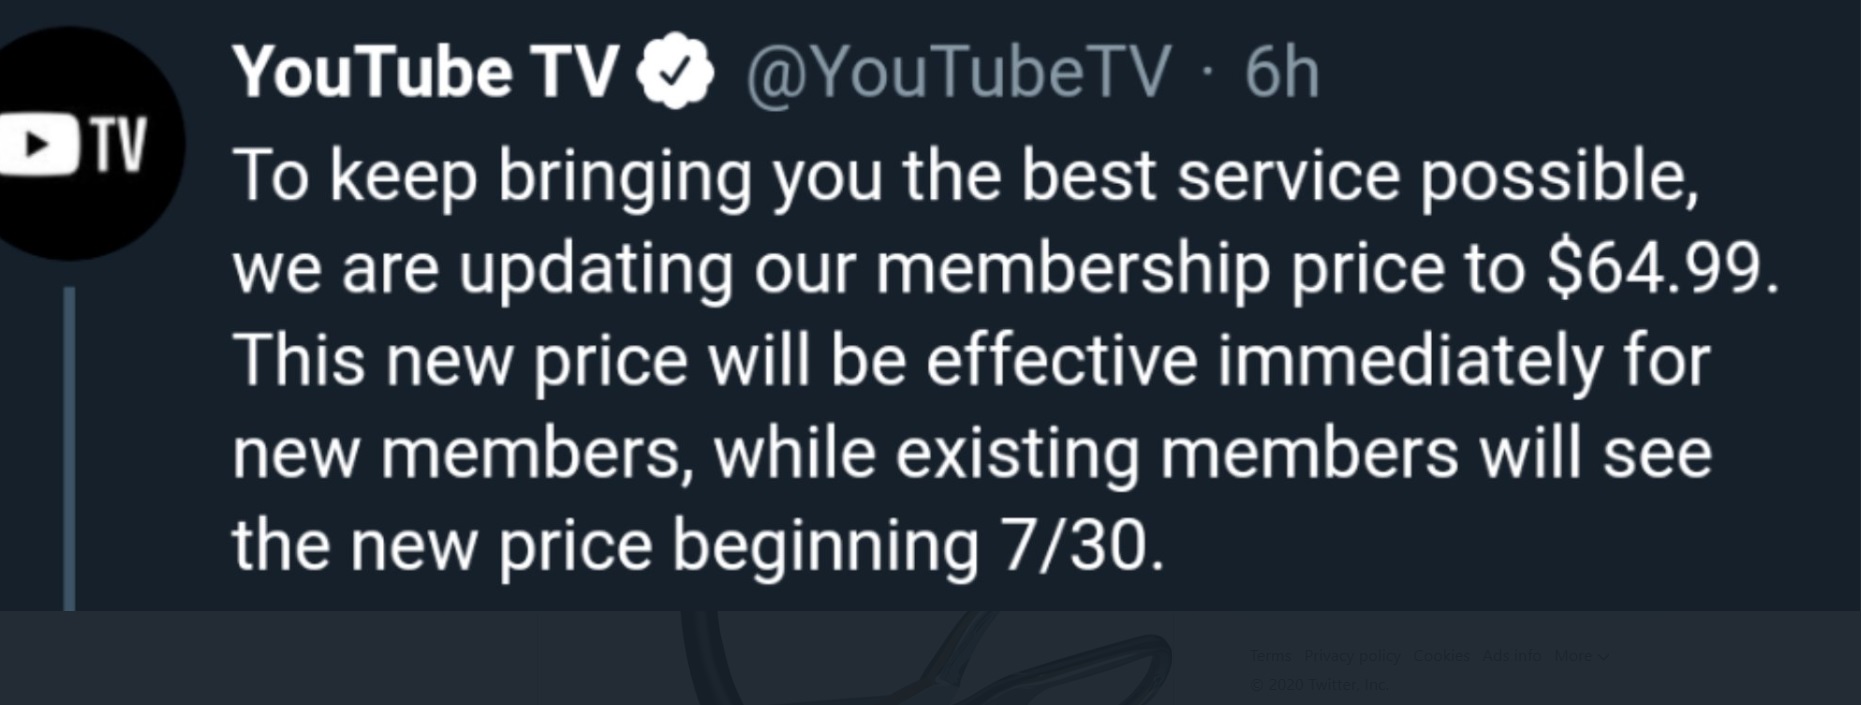 PHOTO Existing Youtube TV Members Will Be Charged New Rate Of $65 On June 30